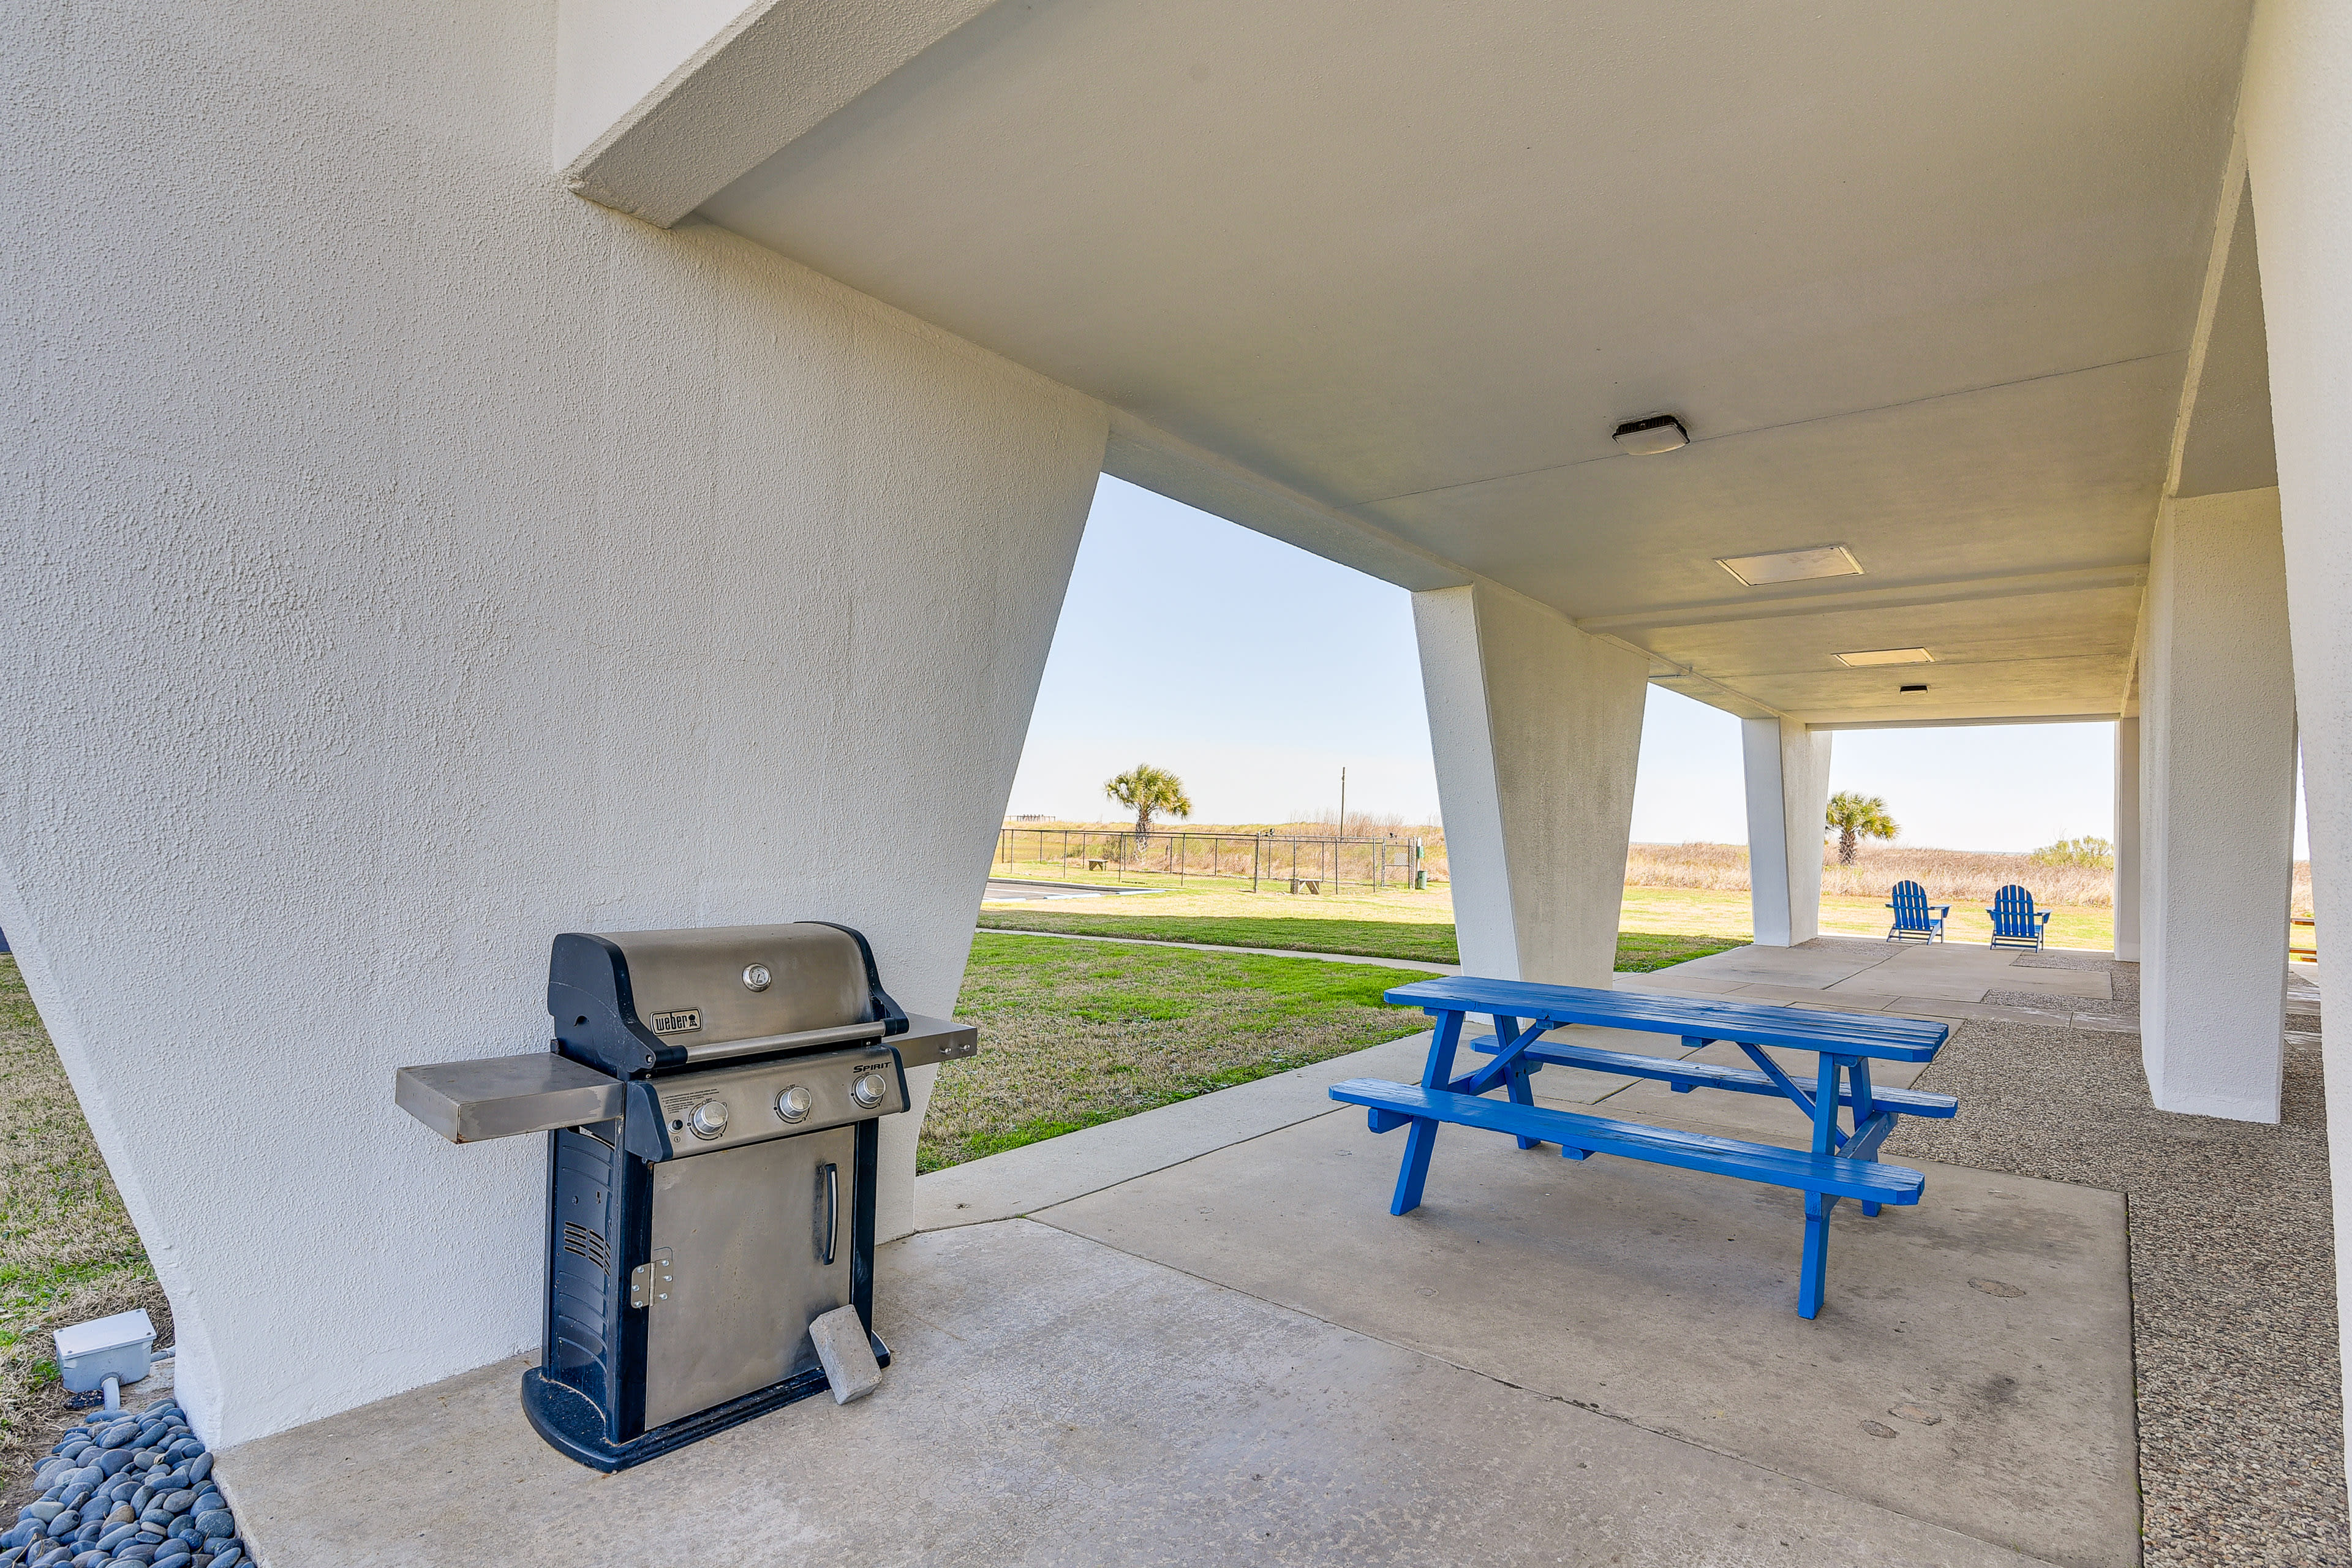 Picnic Area | Gas Grill | Charcoal Grill